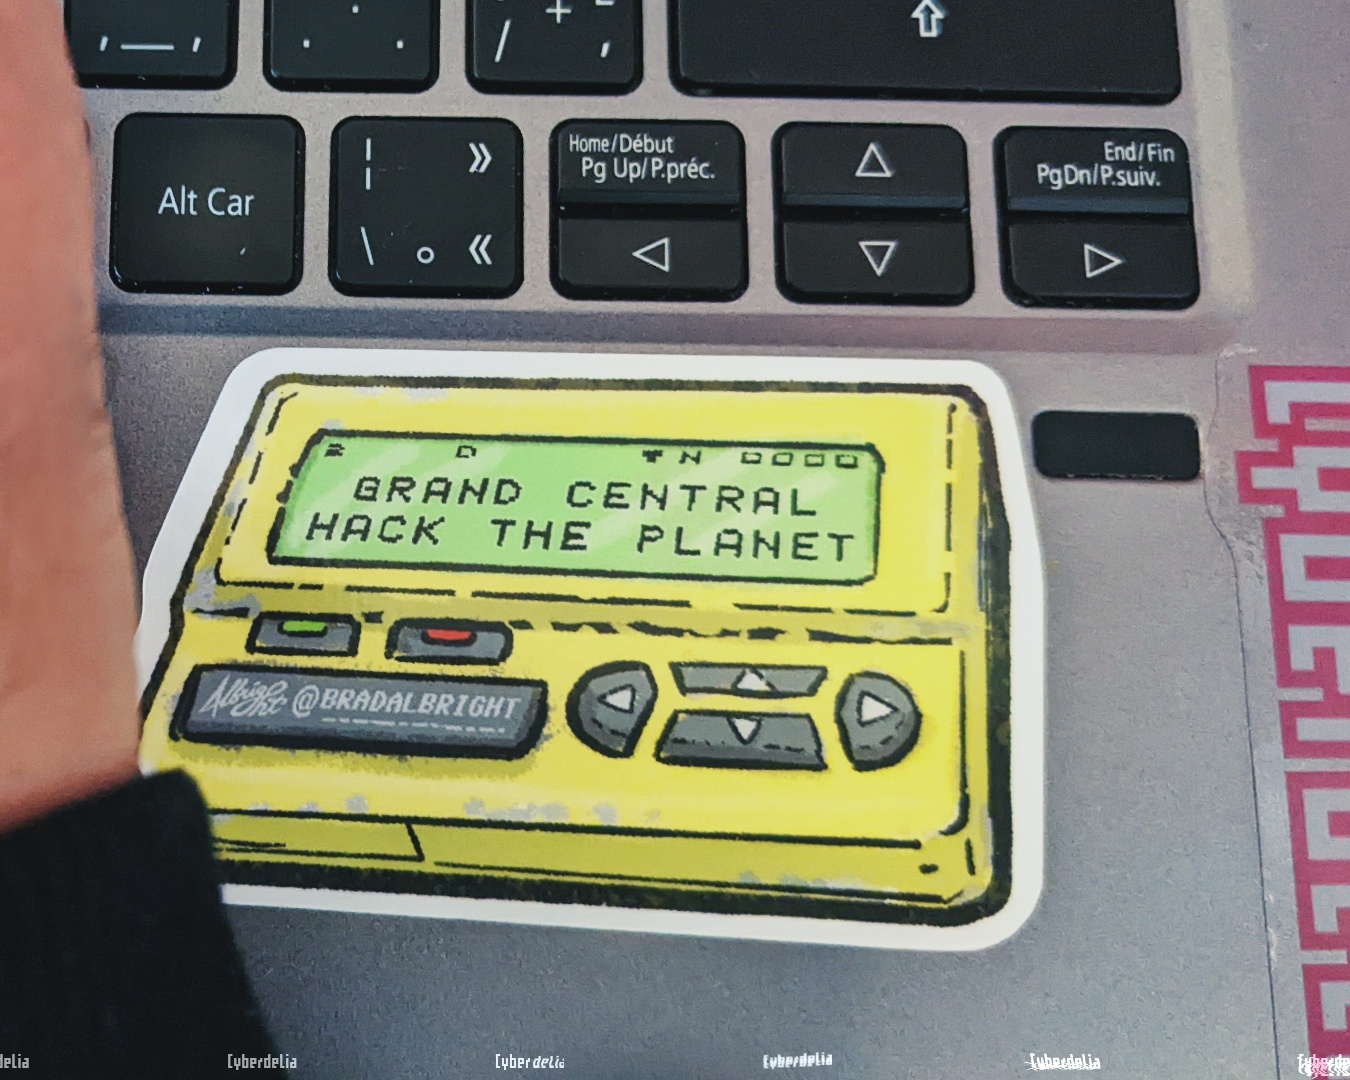 Corner of a laptop keyboard with a sticker on it and edge of a hand typing. Sticker is an illustration of a pager as seen in Hackers (1995) movie, bright yellow with green LCD display and text 'GRAND CENTRAL HACK THE PLANET' on it. Sticker art by Brad Albright. Edge of a Cyberdelia NYC sticker can also be seen on the laptop.